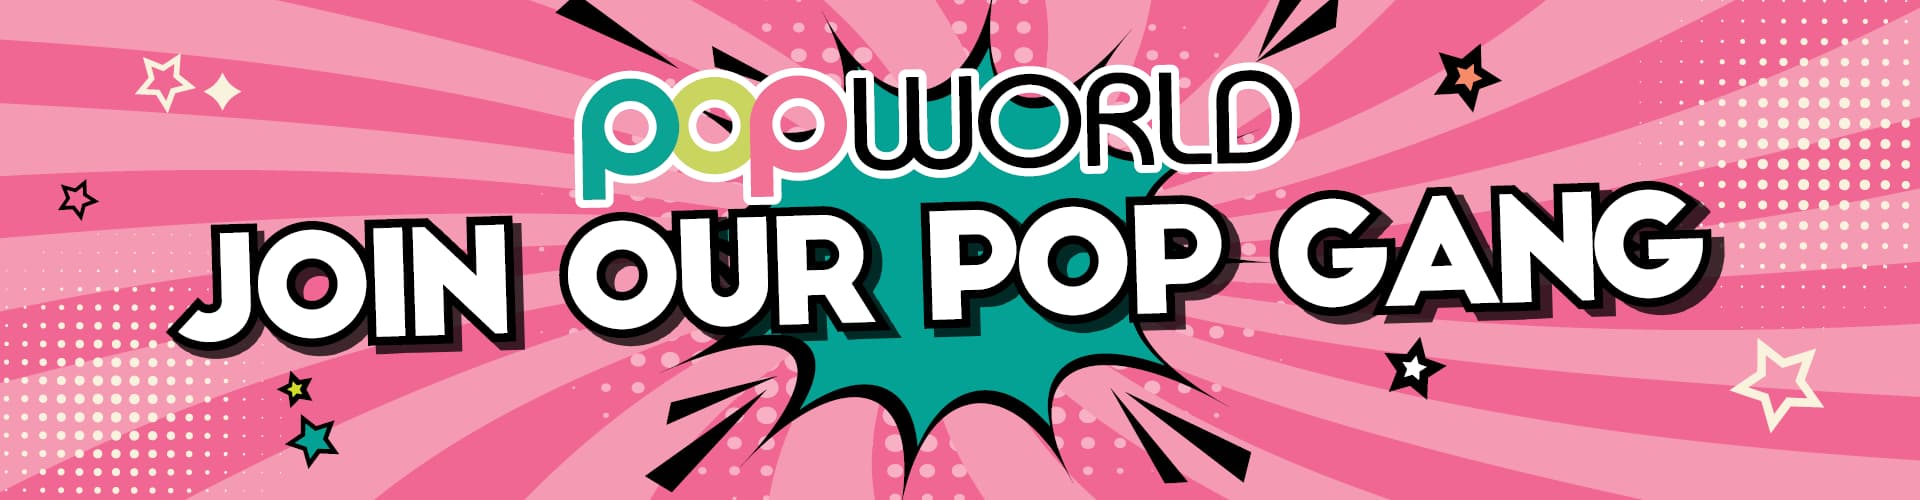 Join our Popworld London Watling Street gang! Sign up today